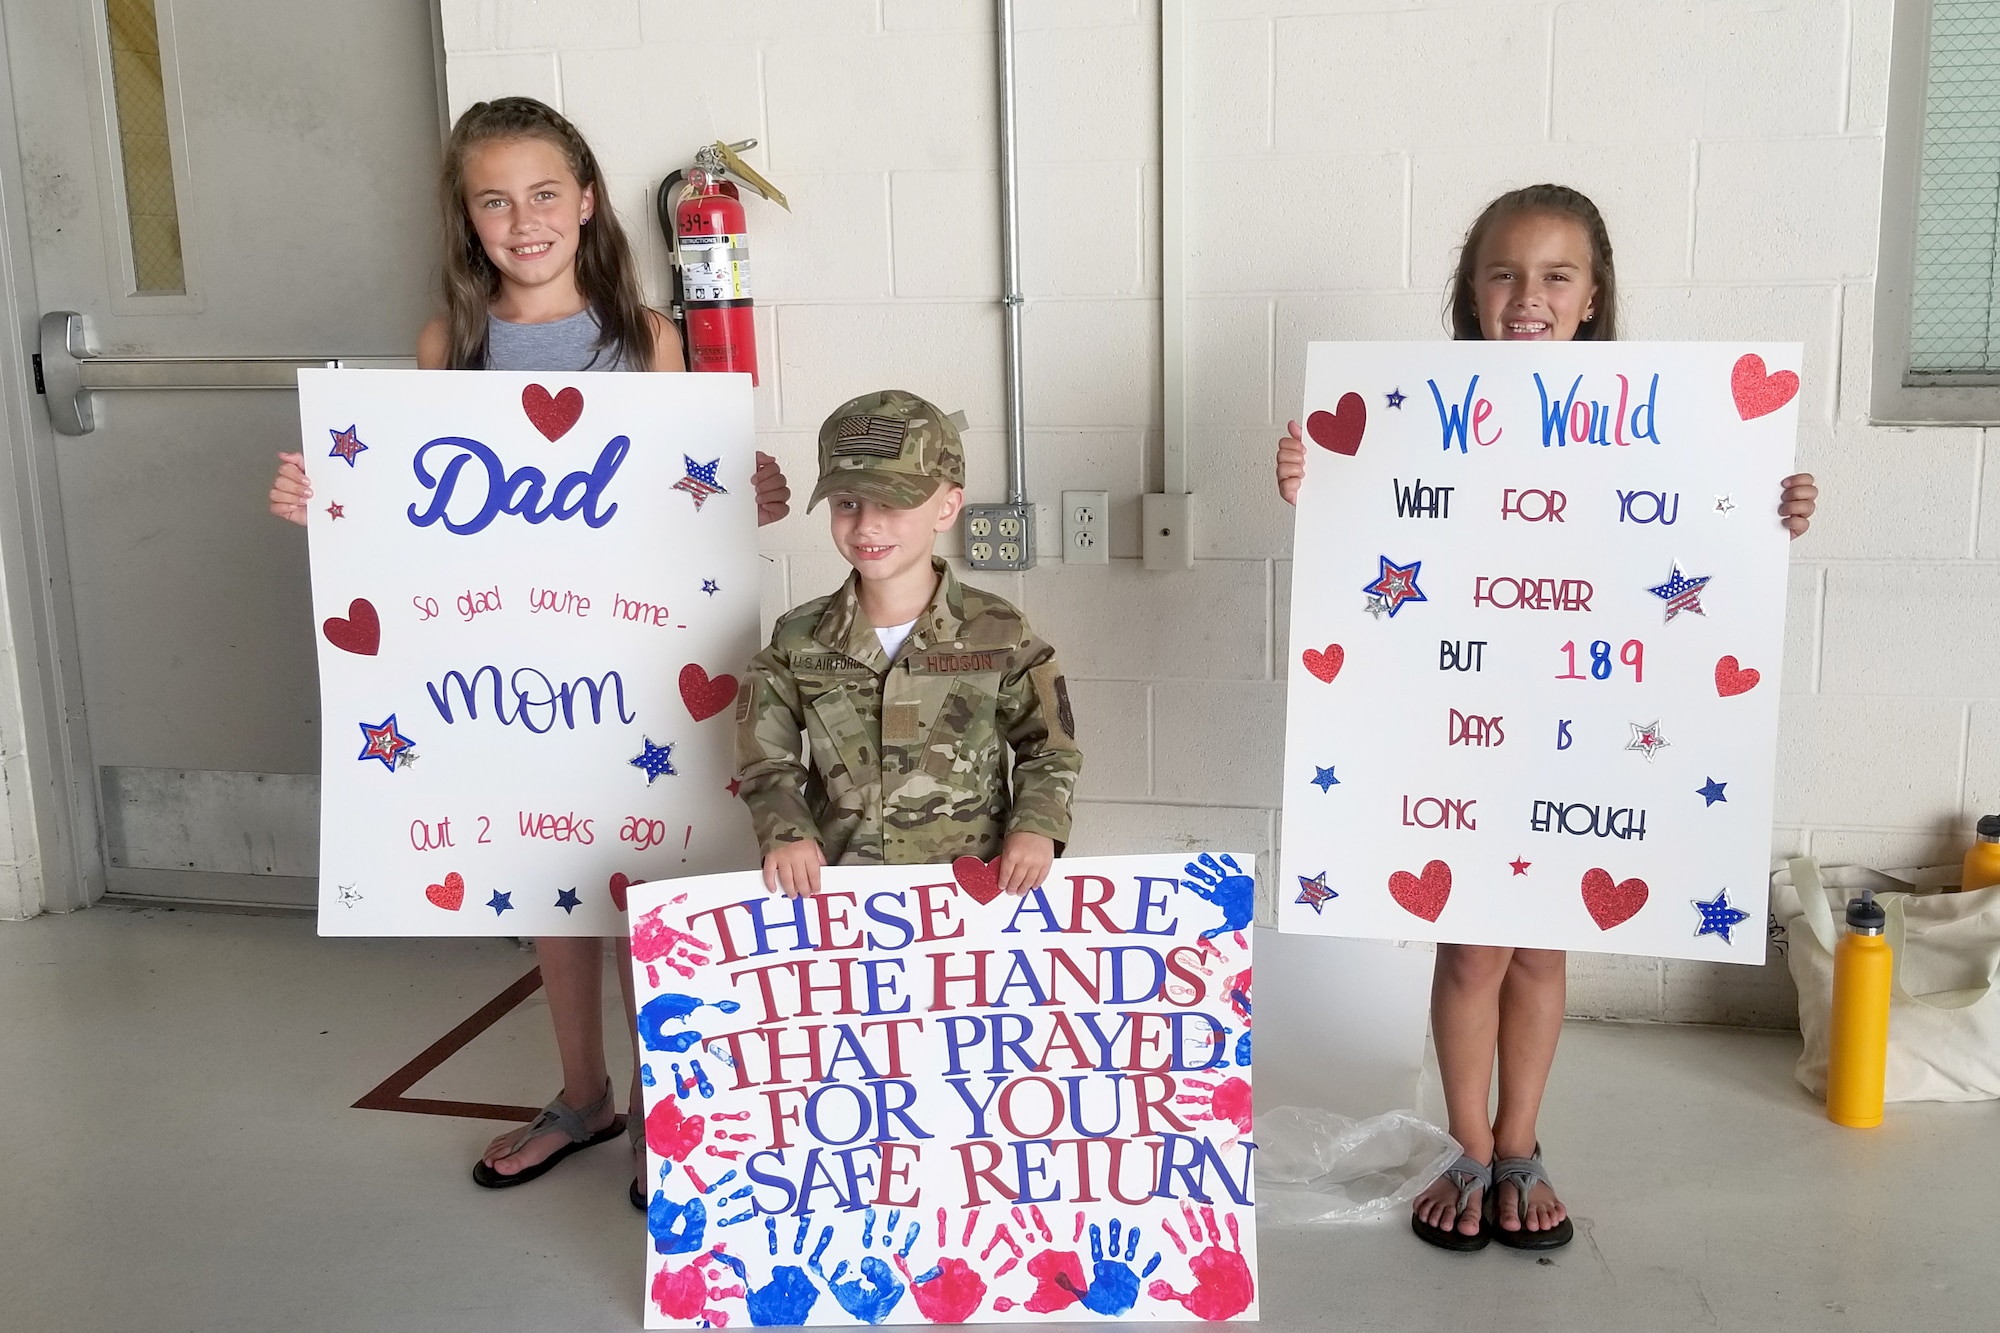 Charlee, Hudson and Mila Morris pose with signs July 15, 2019 at Grissom Air Reserve Base, Indiana while waiting for their father, Master Sgt. Michael Morris, to return home from his deployment. Their father along with 15 other Airmen were greeted and flown home by leadership after arriving at the Baltimore-Washington International airport. (U.S. photo/Ben Mota)